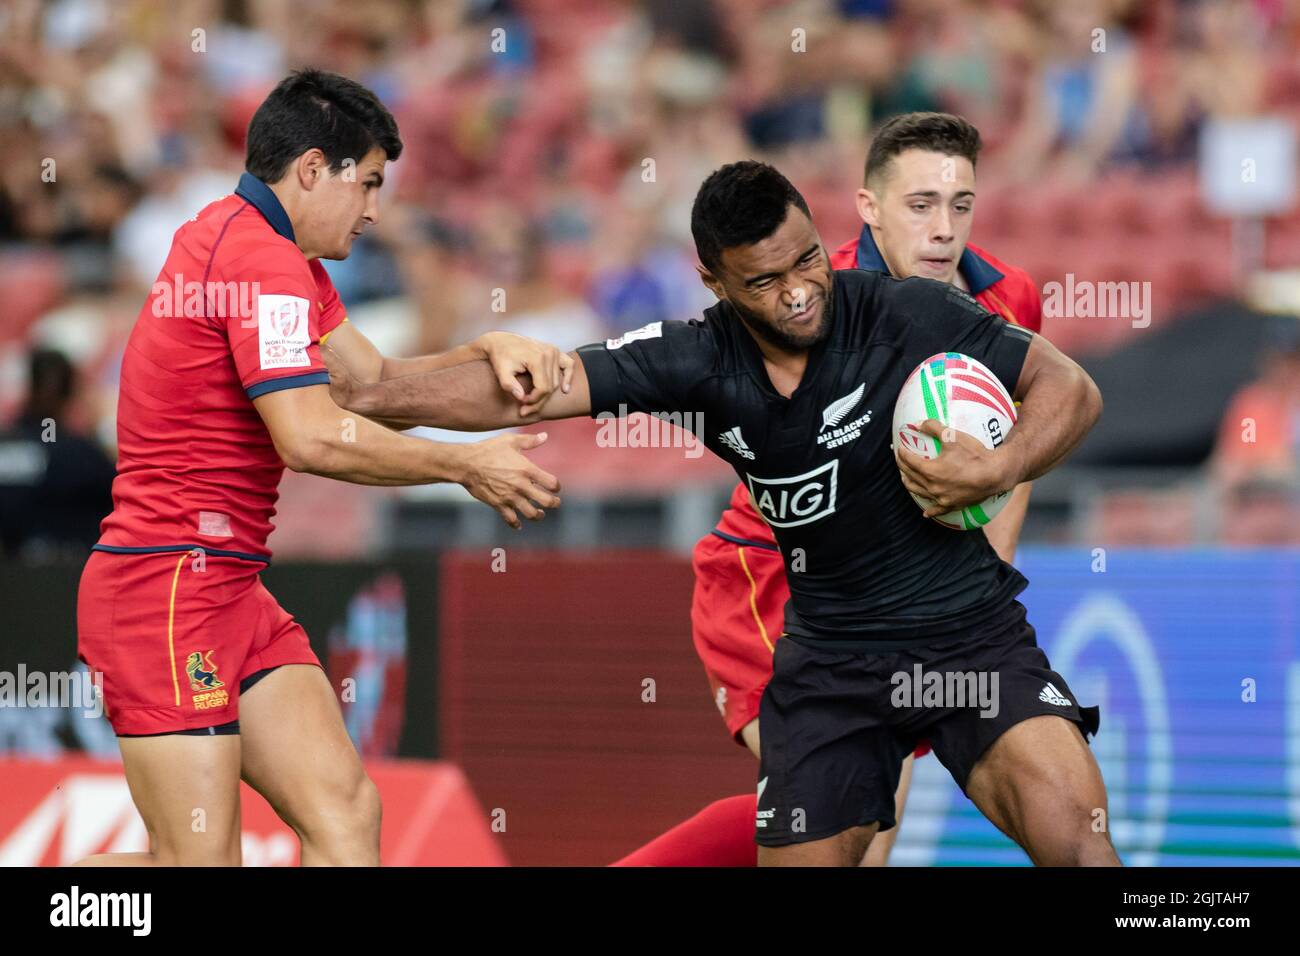 SINGAPORE-APRIL 13:New Zealand 7s Team (blalck) plays against Spain 7s team (red) during Day 1 of HSBC World Rugby Singapore Sevens on April 13, 2019 at National Stadium in Singapore Stock Photo